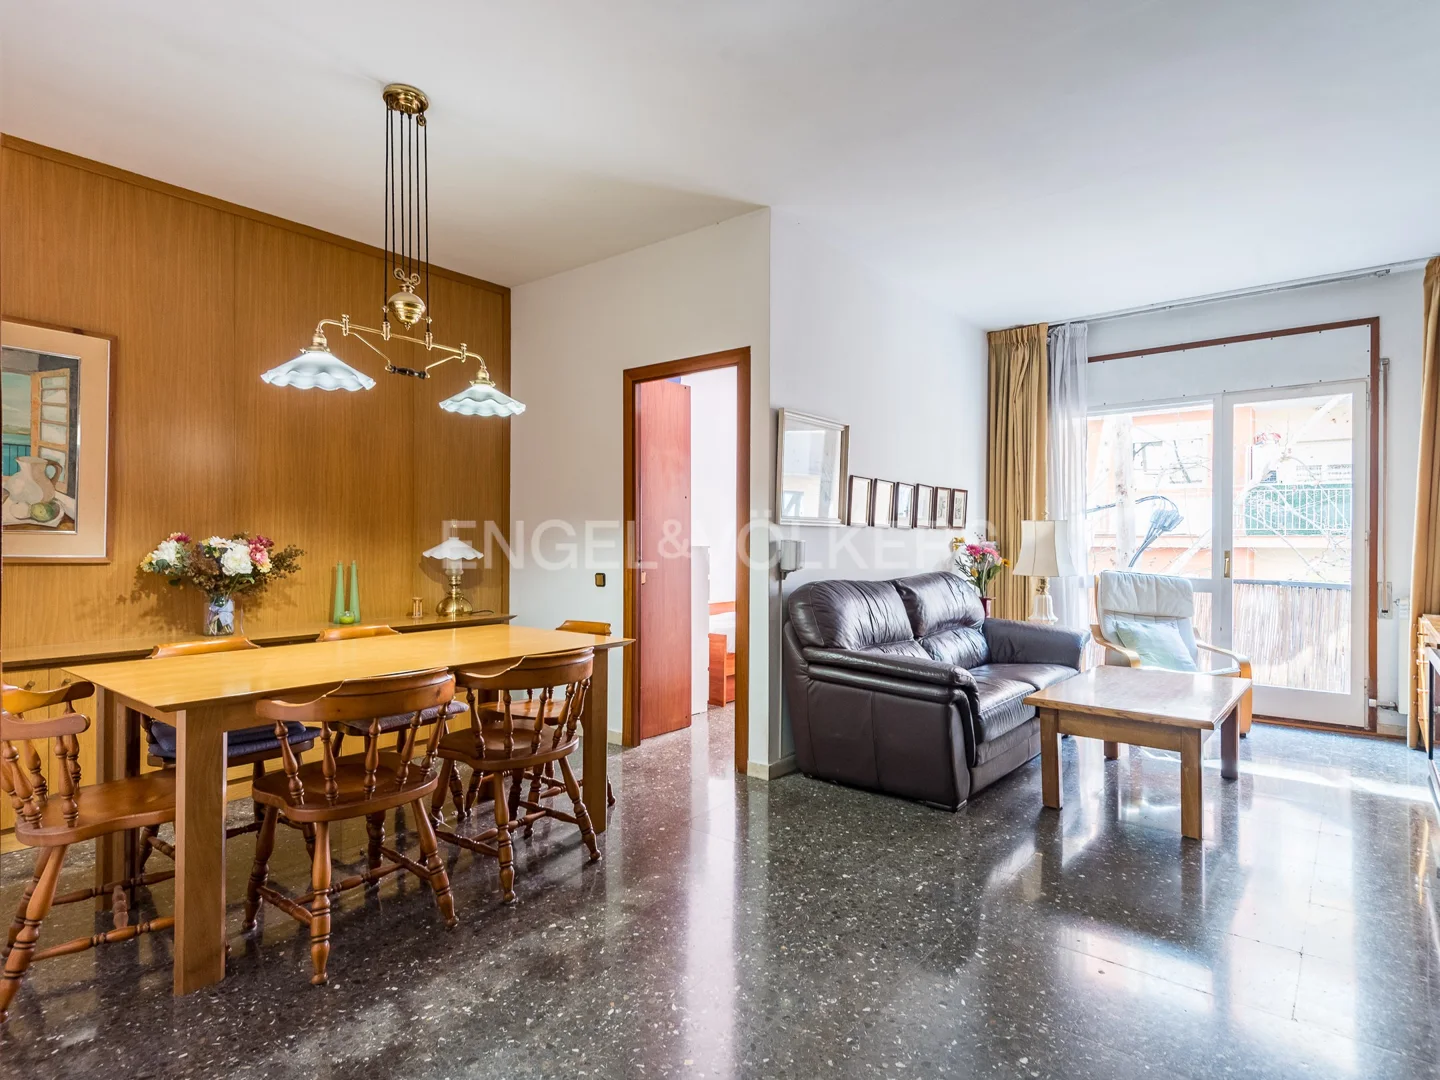 Flat with four bedrooms, two bathrooms and two balconies